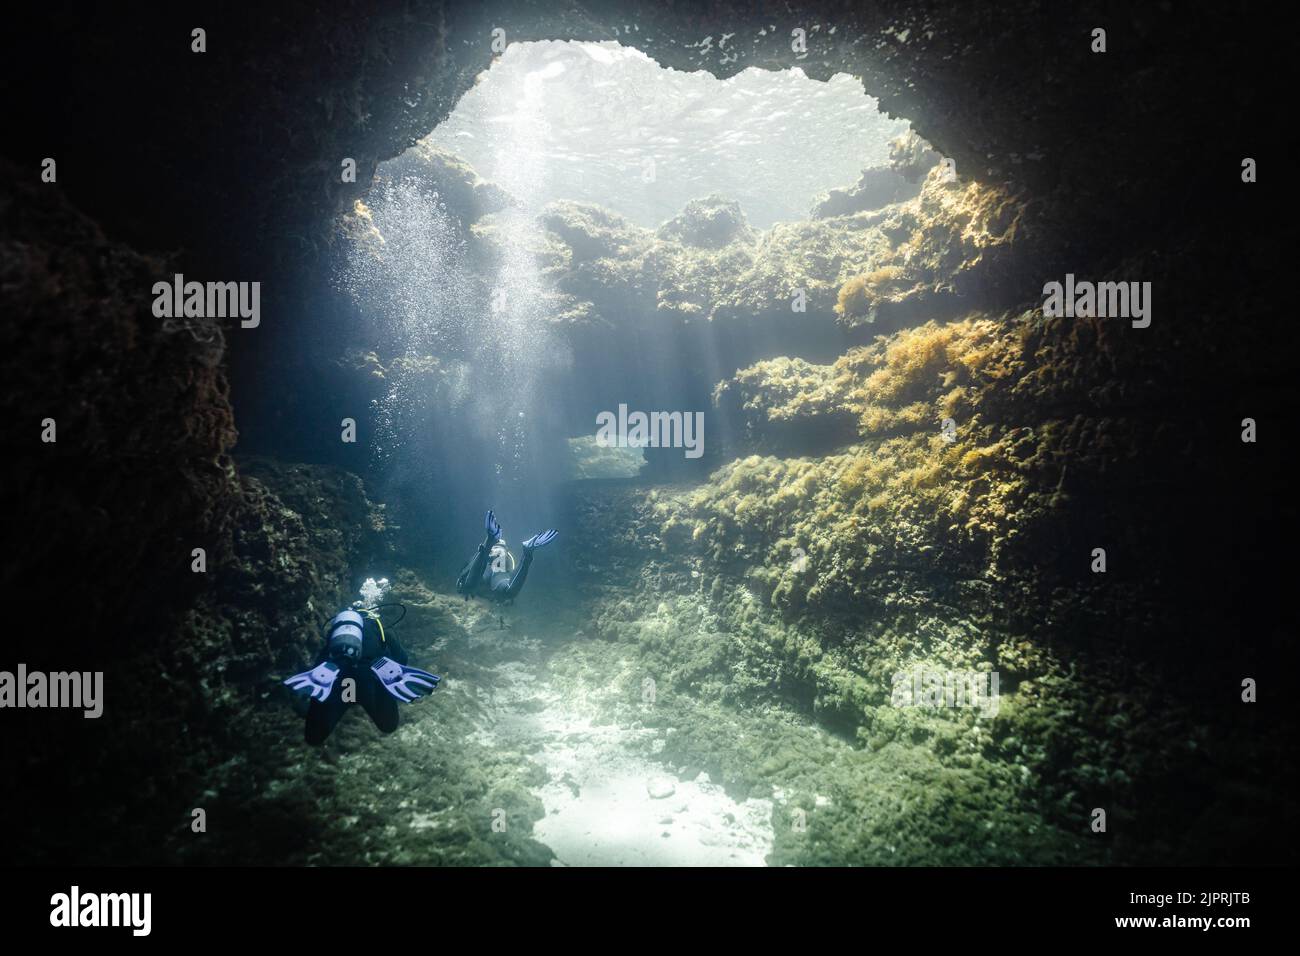 Two divers diving through cavern oh their way back from Alex Cave in Comino, Malta with light shining on them through a hole in a relaxed atmosphere. Stock Photo